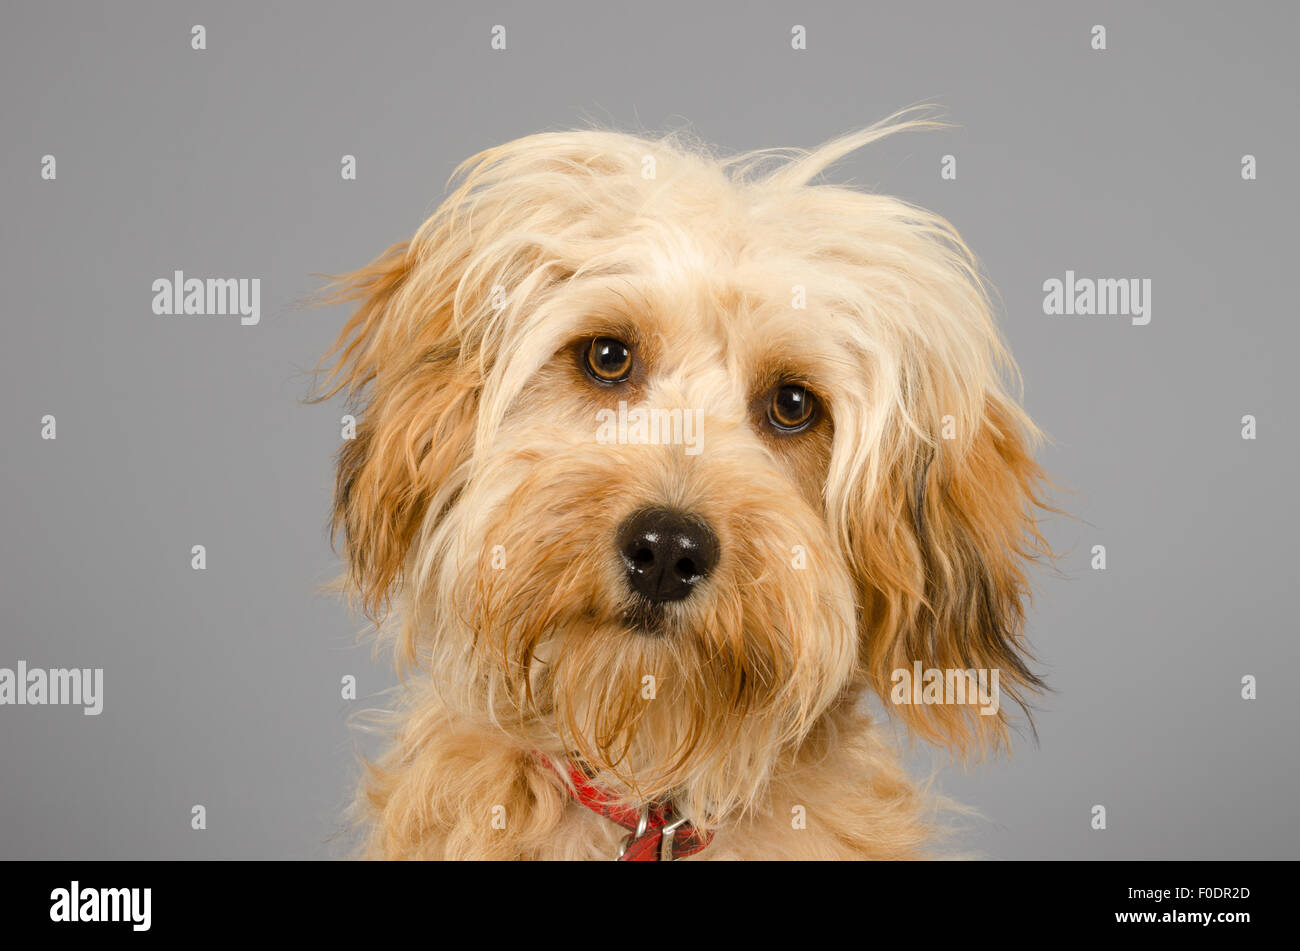 dog with long messy hair on grey background Stock Photo - Alamy